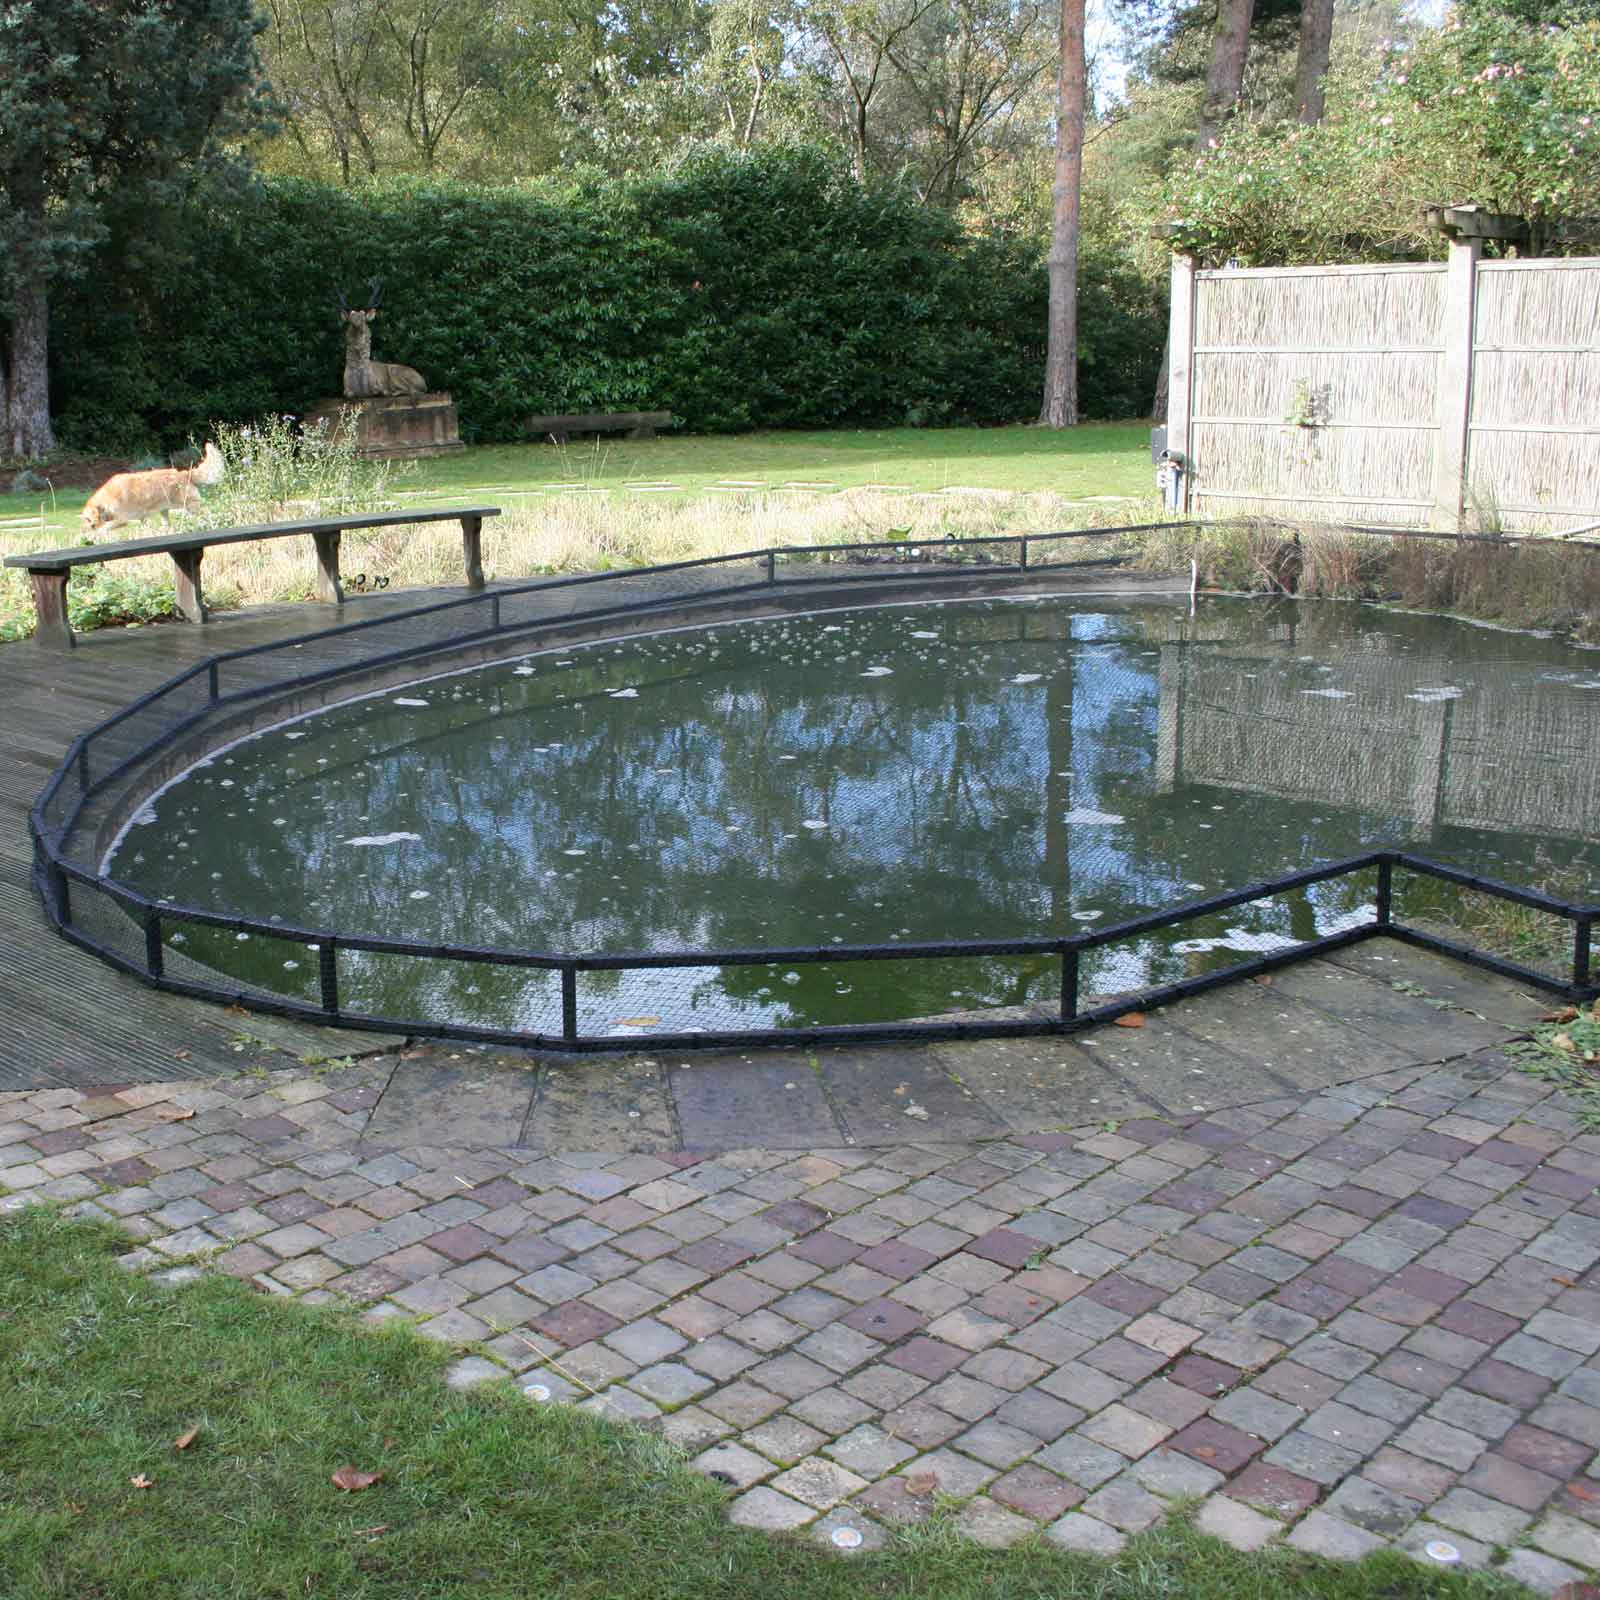 How To Choose The Correct Pond Netting